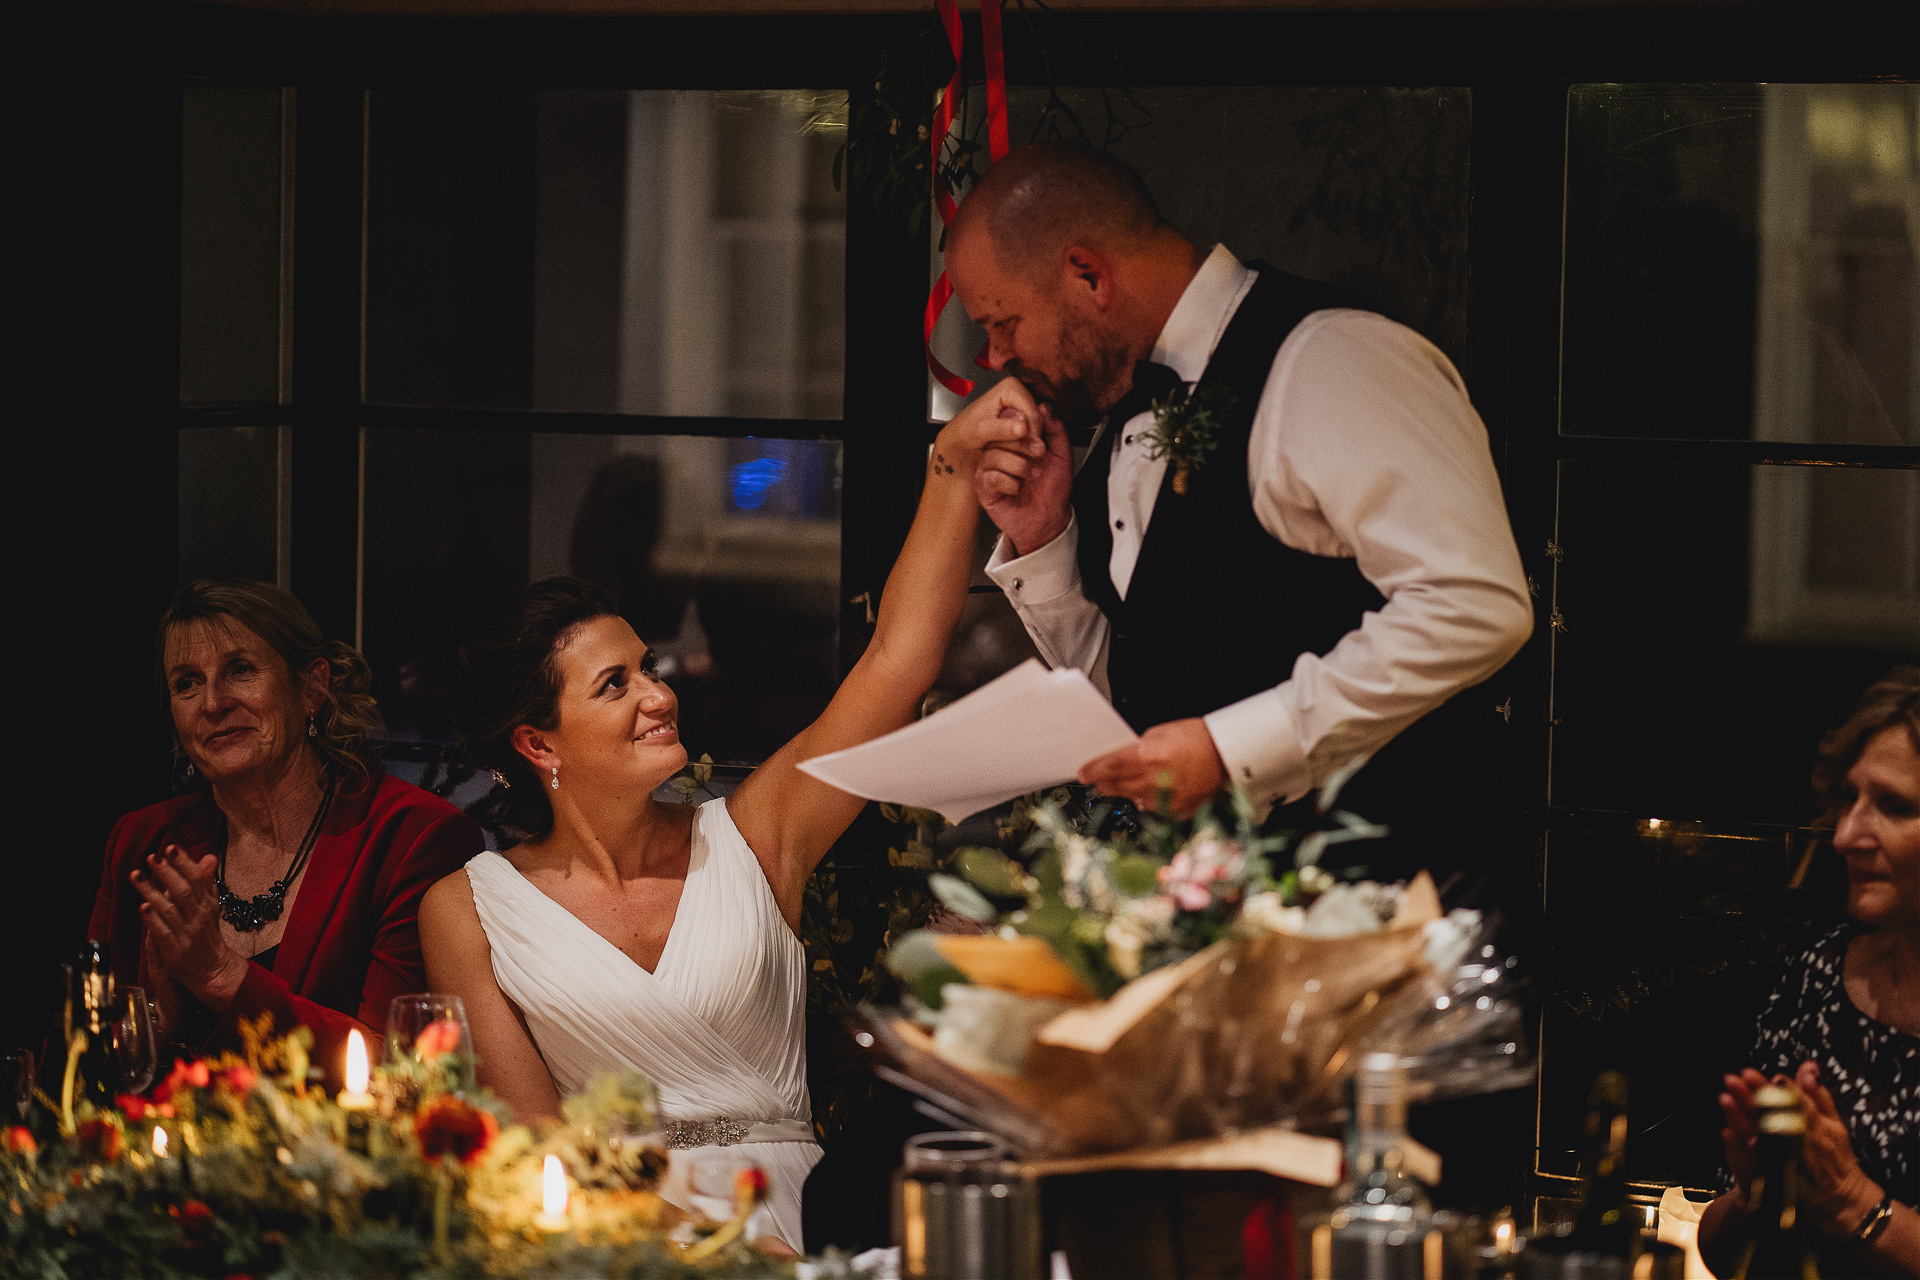 Groom kissing bride's hand at a dinner table